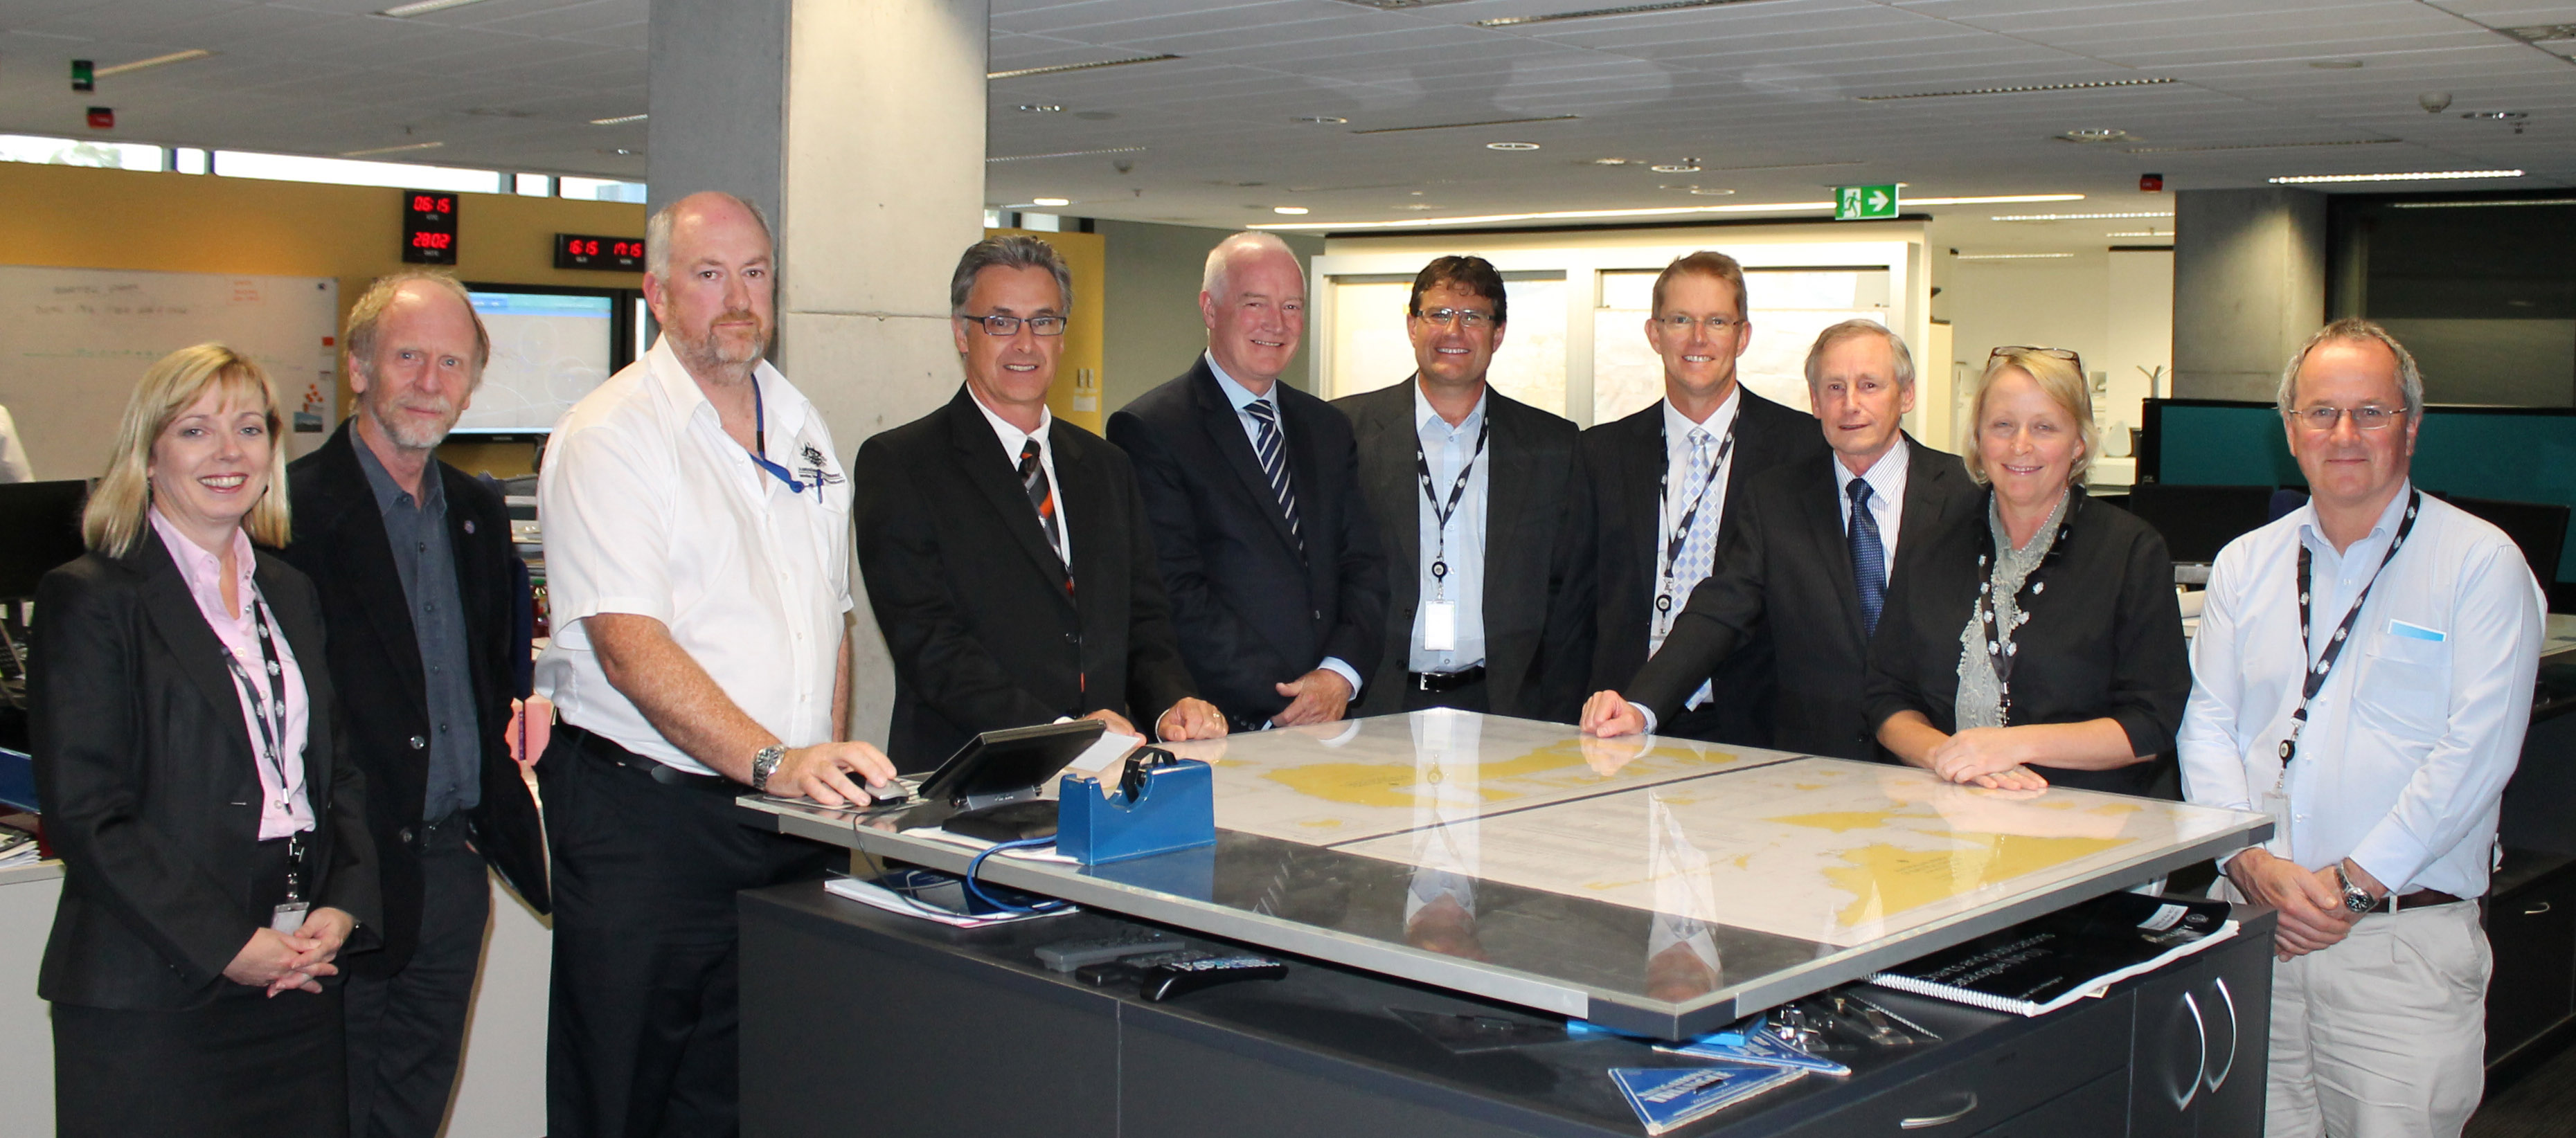 (l to r) Toni Moate, Professor Richard Arculus, Scott Constable, Rescue Coordination Centre Chief-AMSA, Professor Craig Johnson, Graham Peachey, Ron Plaschke, Greg Paten, John Young, General Manager, Emergency Response Division-AMSA, Linda Gaskell and Leigh Walters